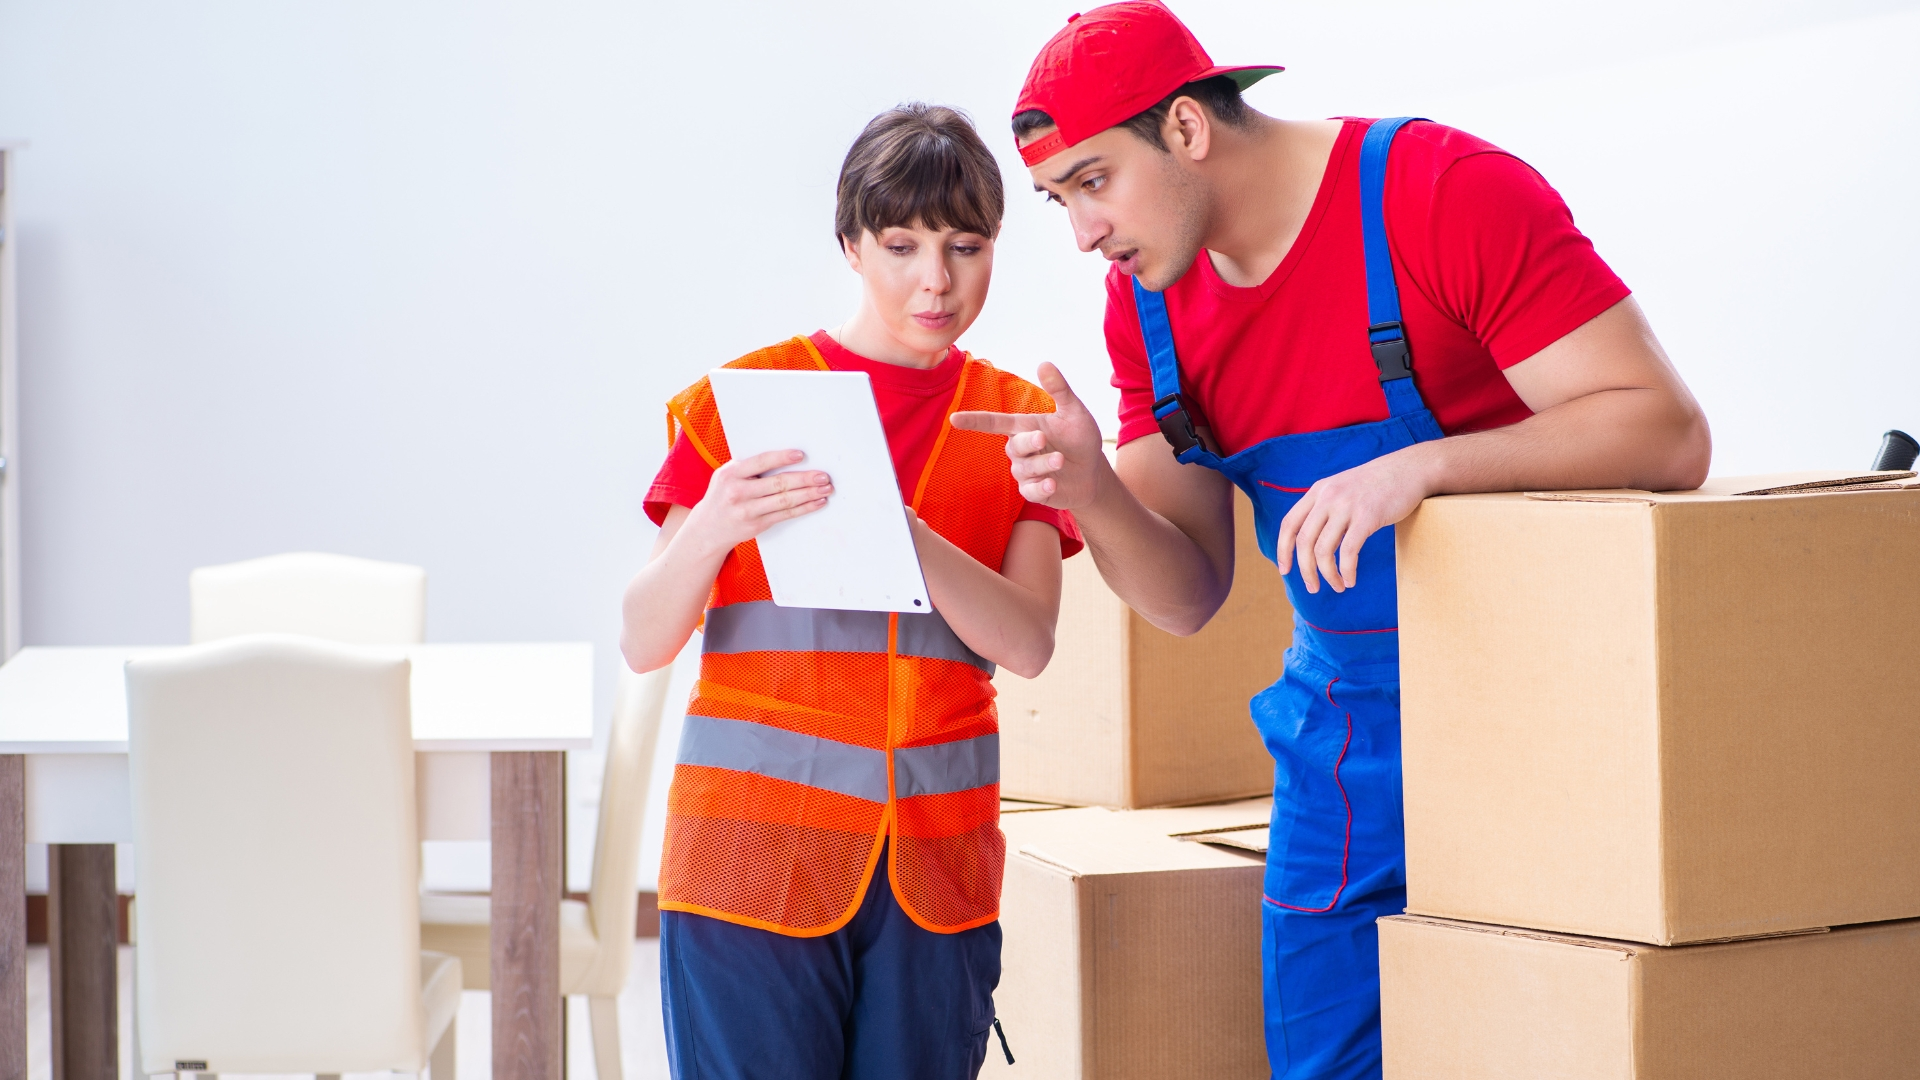 What's the Best Approach to Unpacking and Settling Into a New Home?